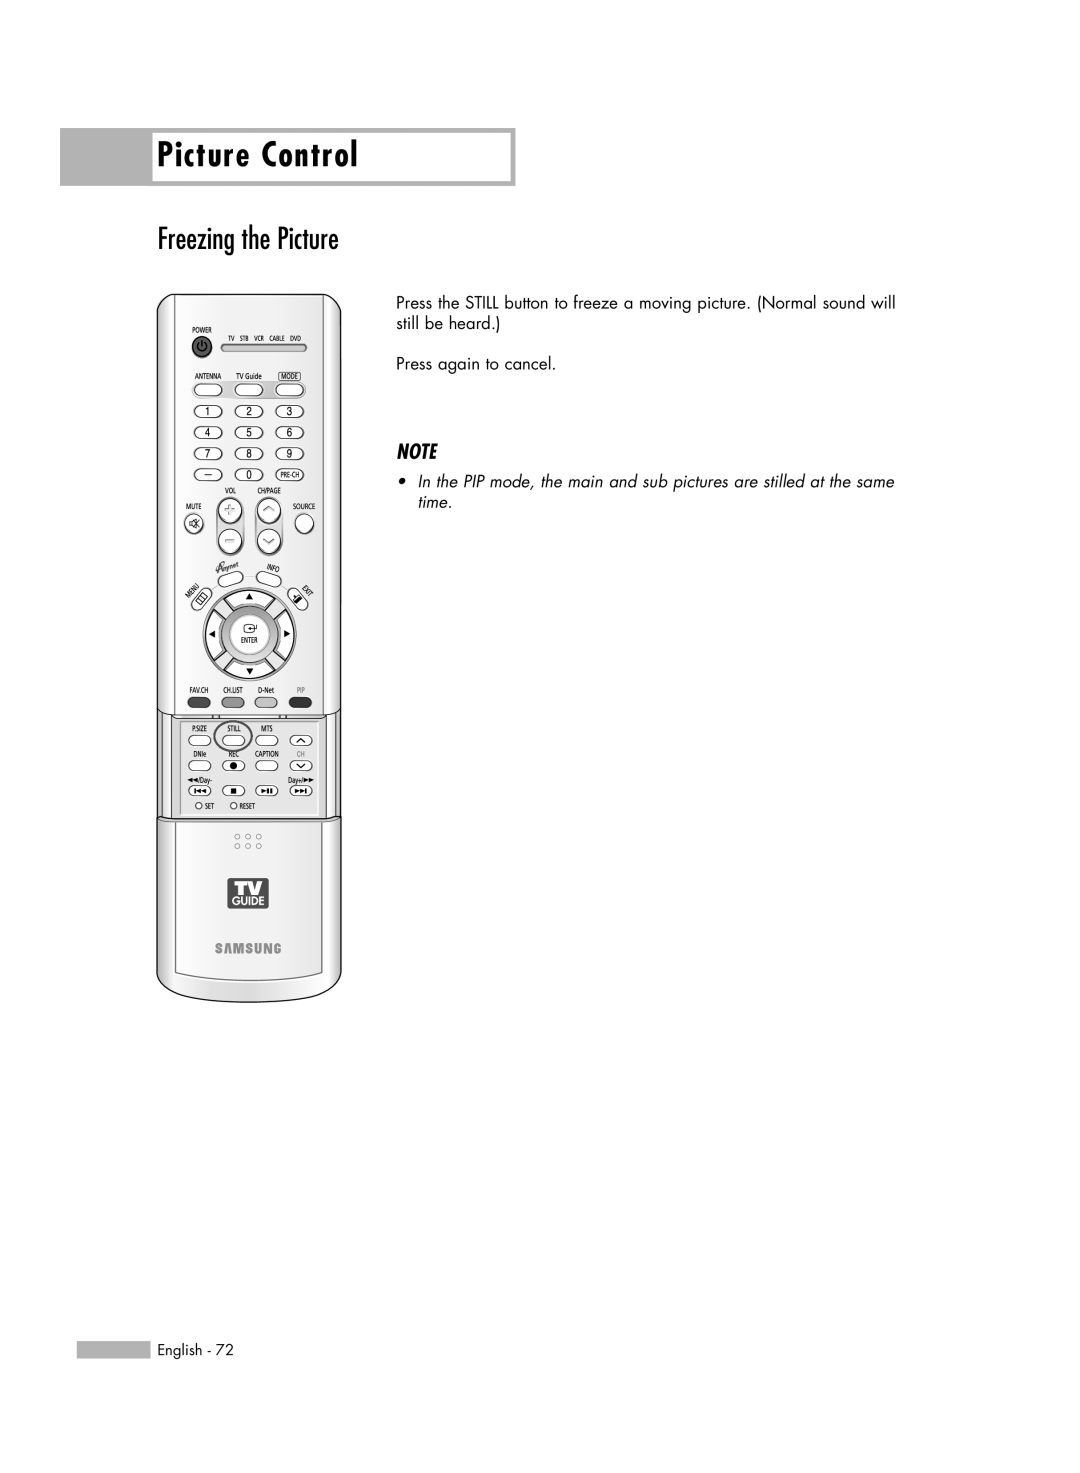 Samsung HL-R5688W manual Freezing the Picture, Picture Control, Press again to cancel 